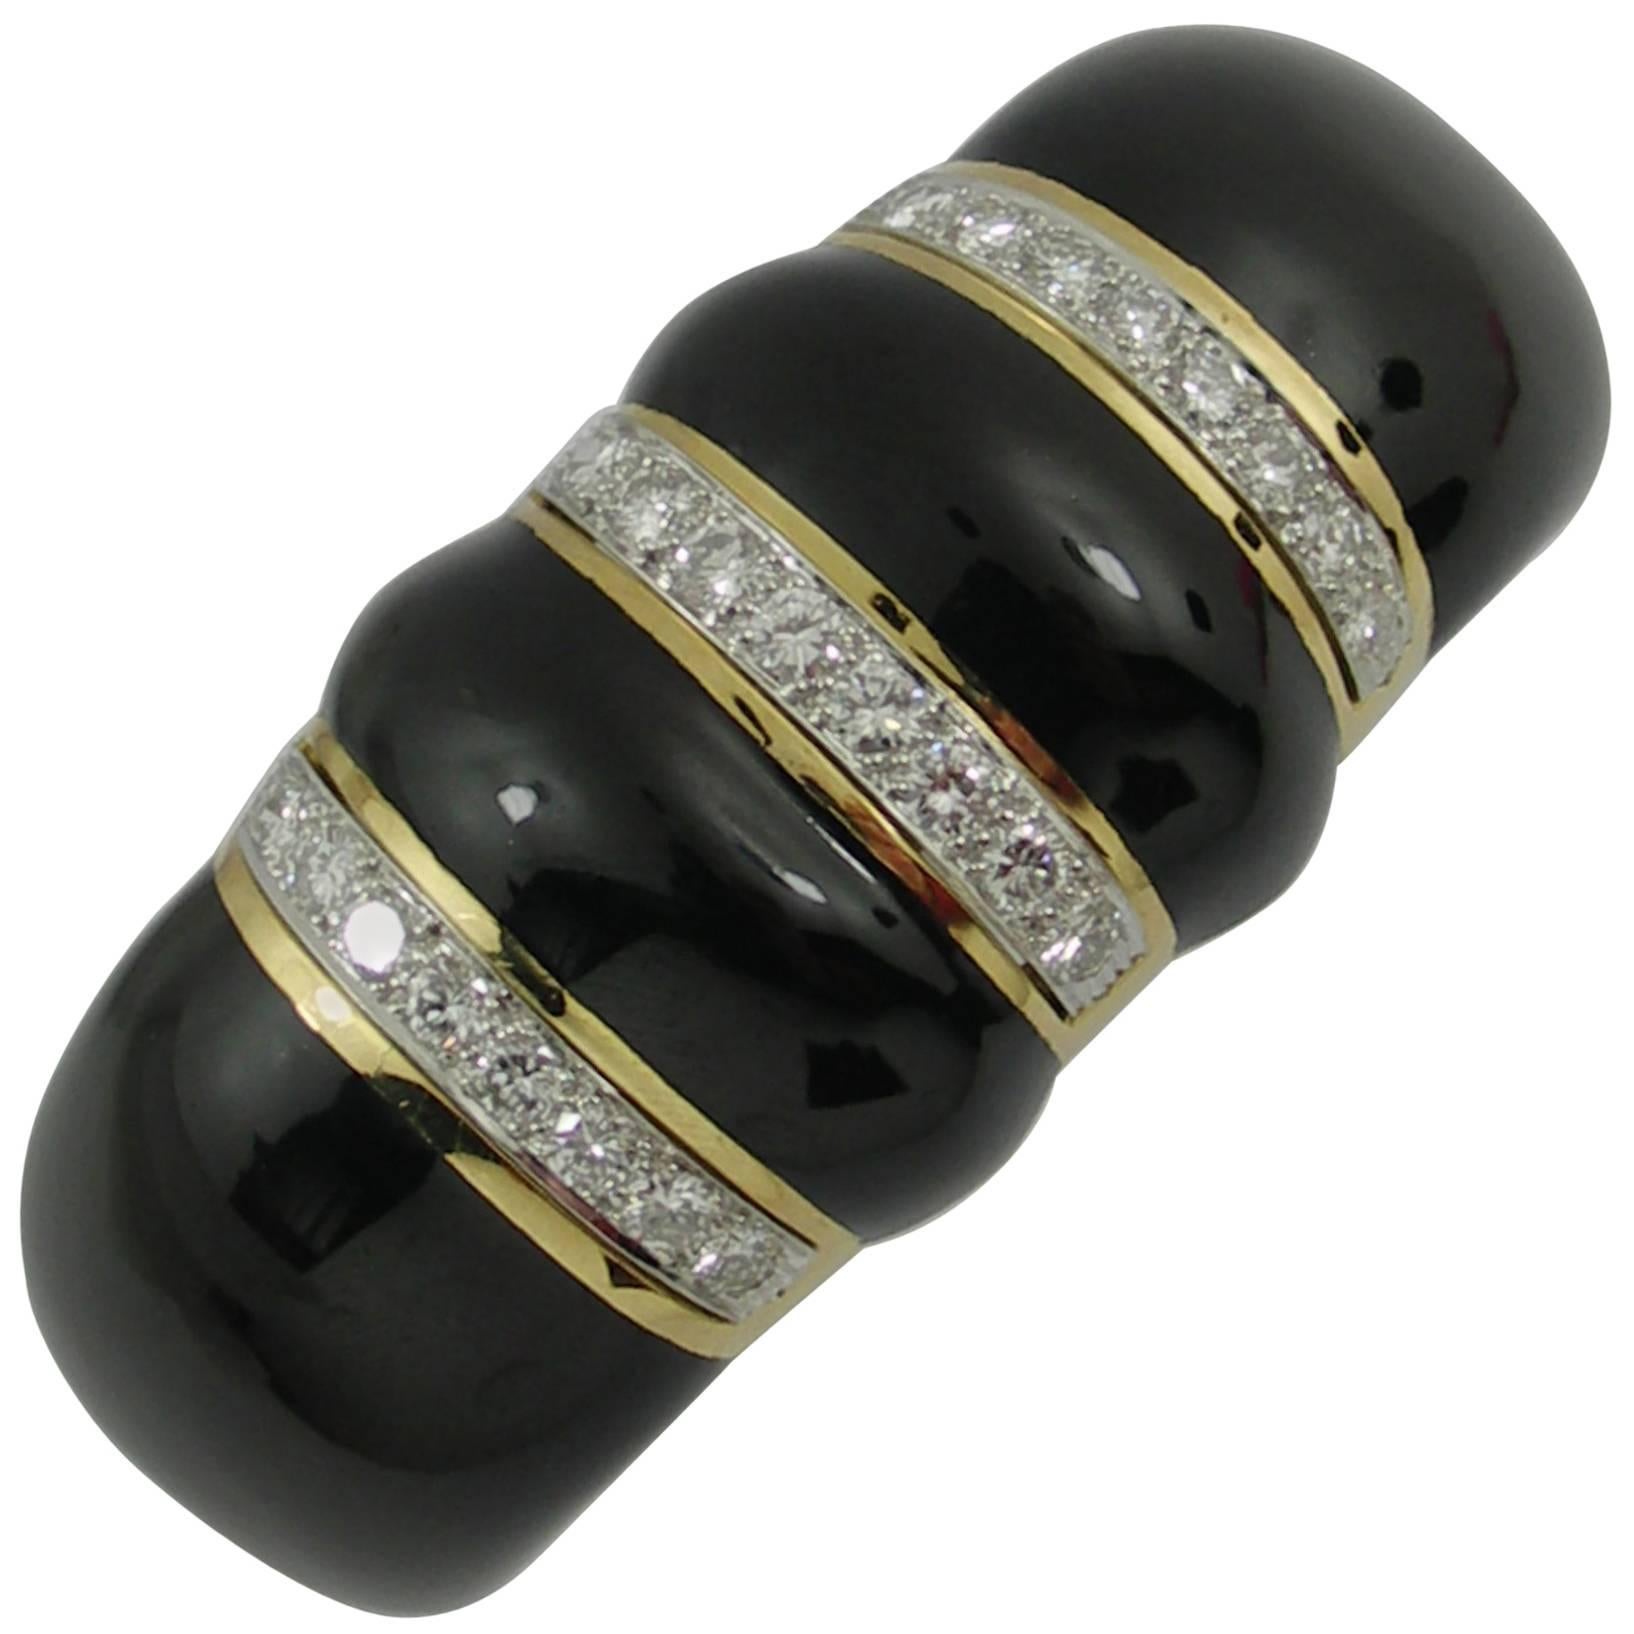 A rounded 18K yellow gold cuff bracelet, with a bombe design accented with black enamel, and set with diamonds. With 24 round brilliant cut diamonds set into platinum strips, this important piece has sparkle as well as substance. The diamonds weigh